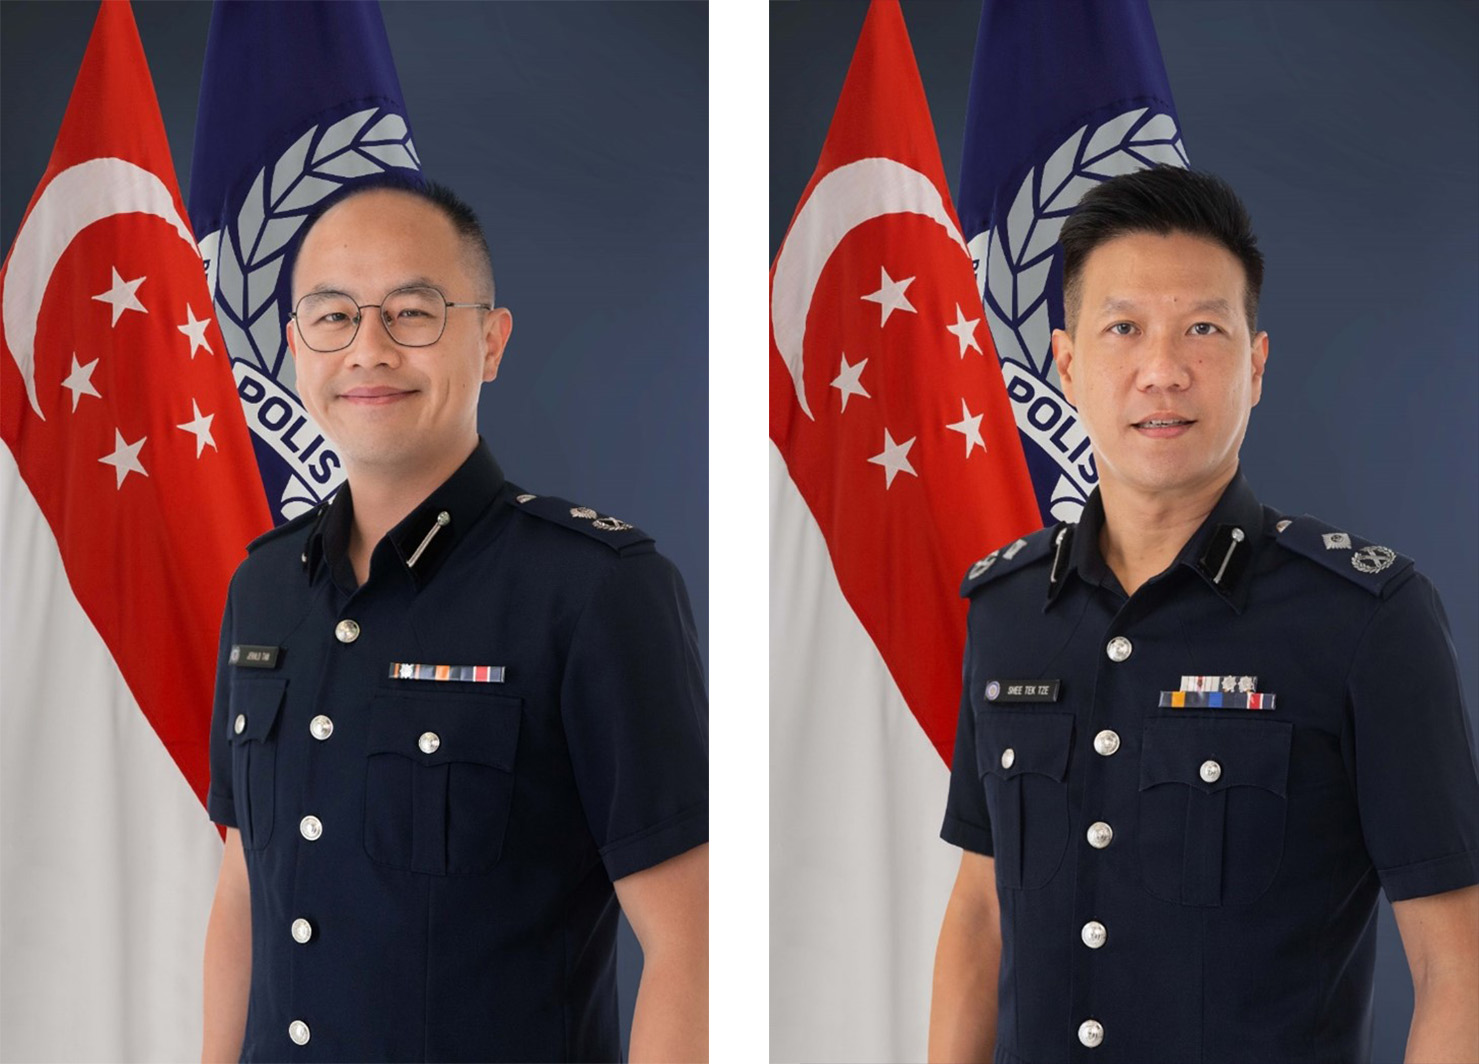 20220826_change_of_command_at_jurong_division_1